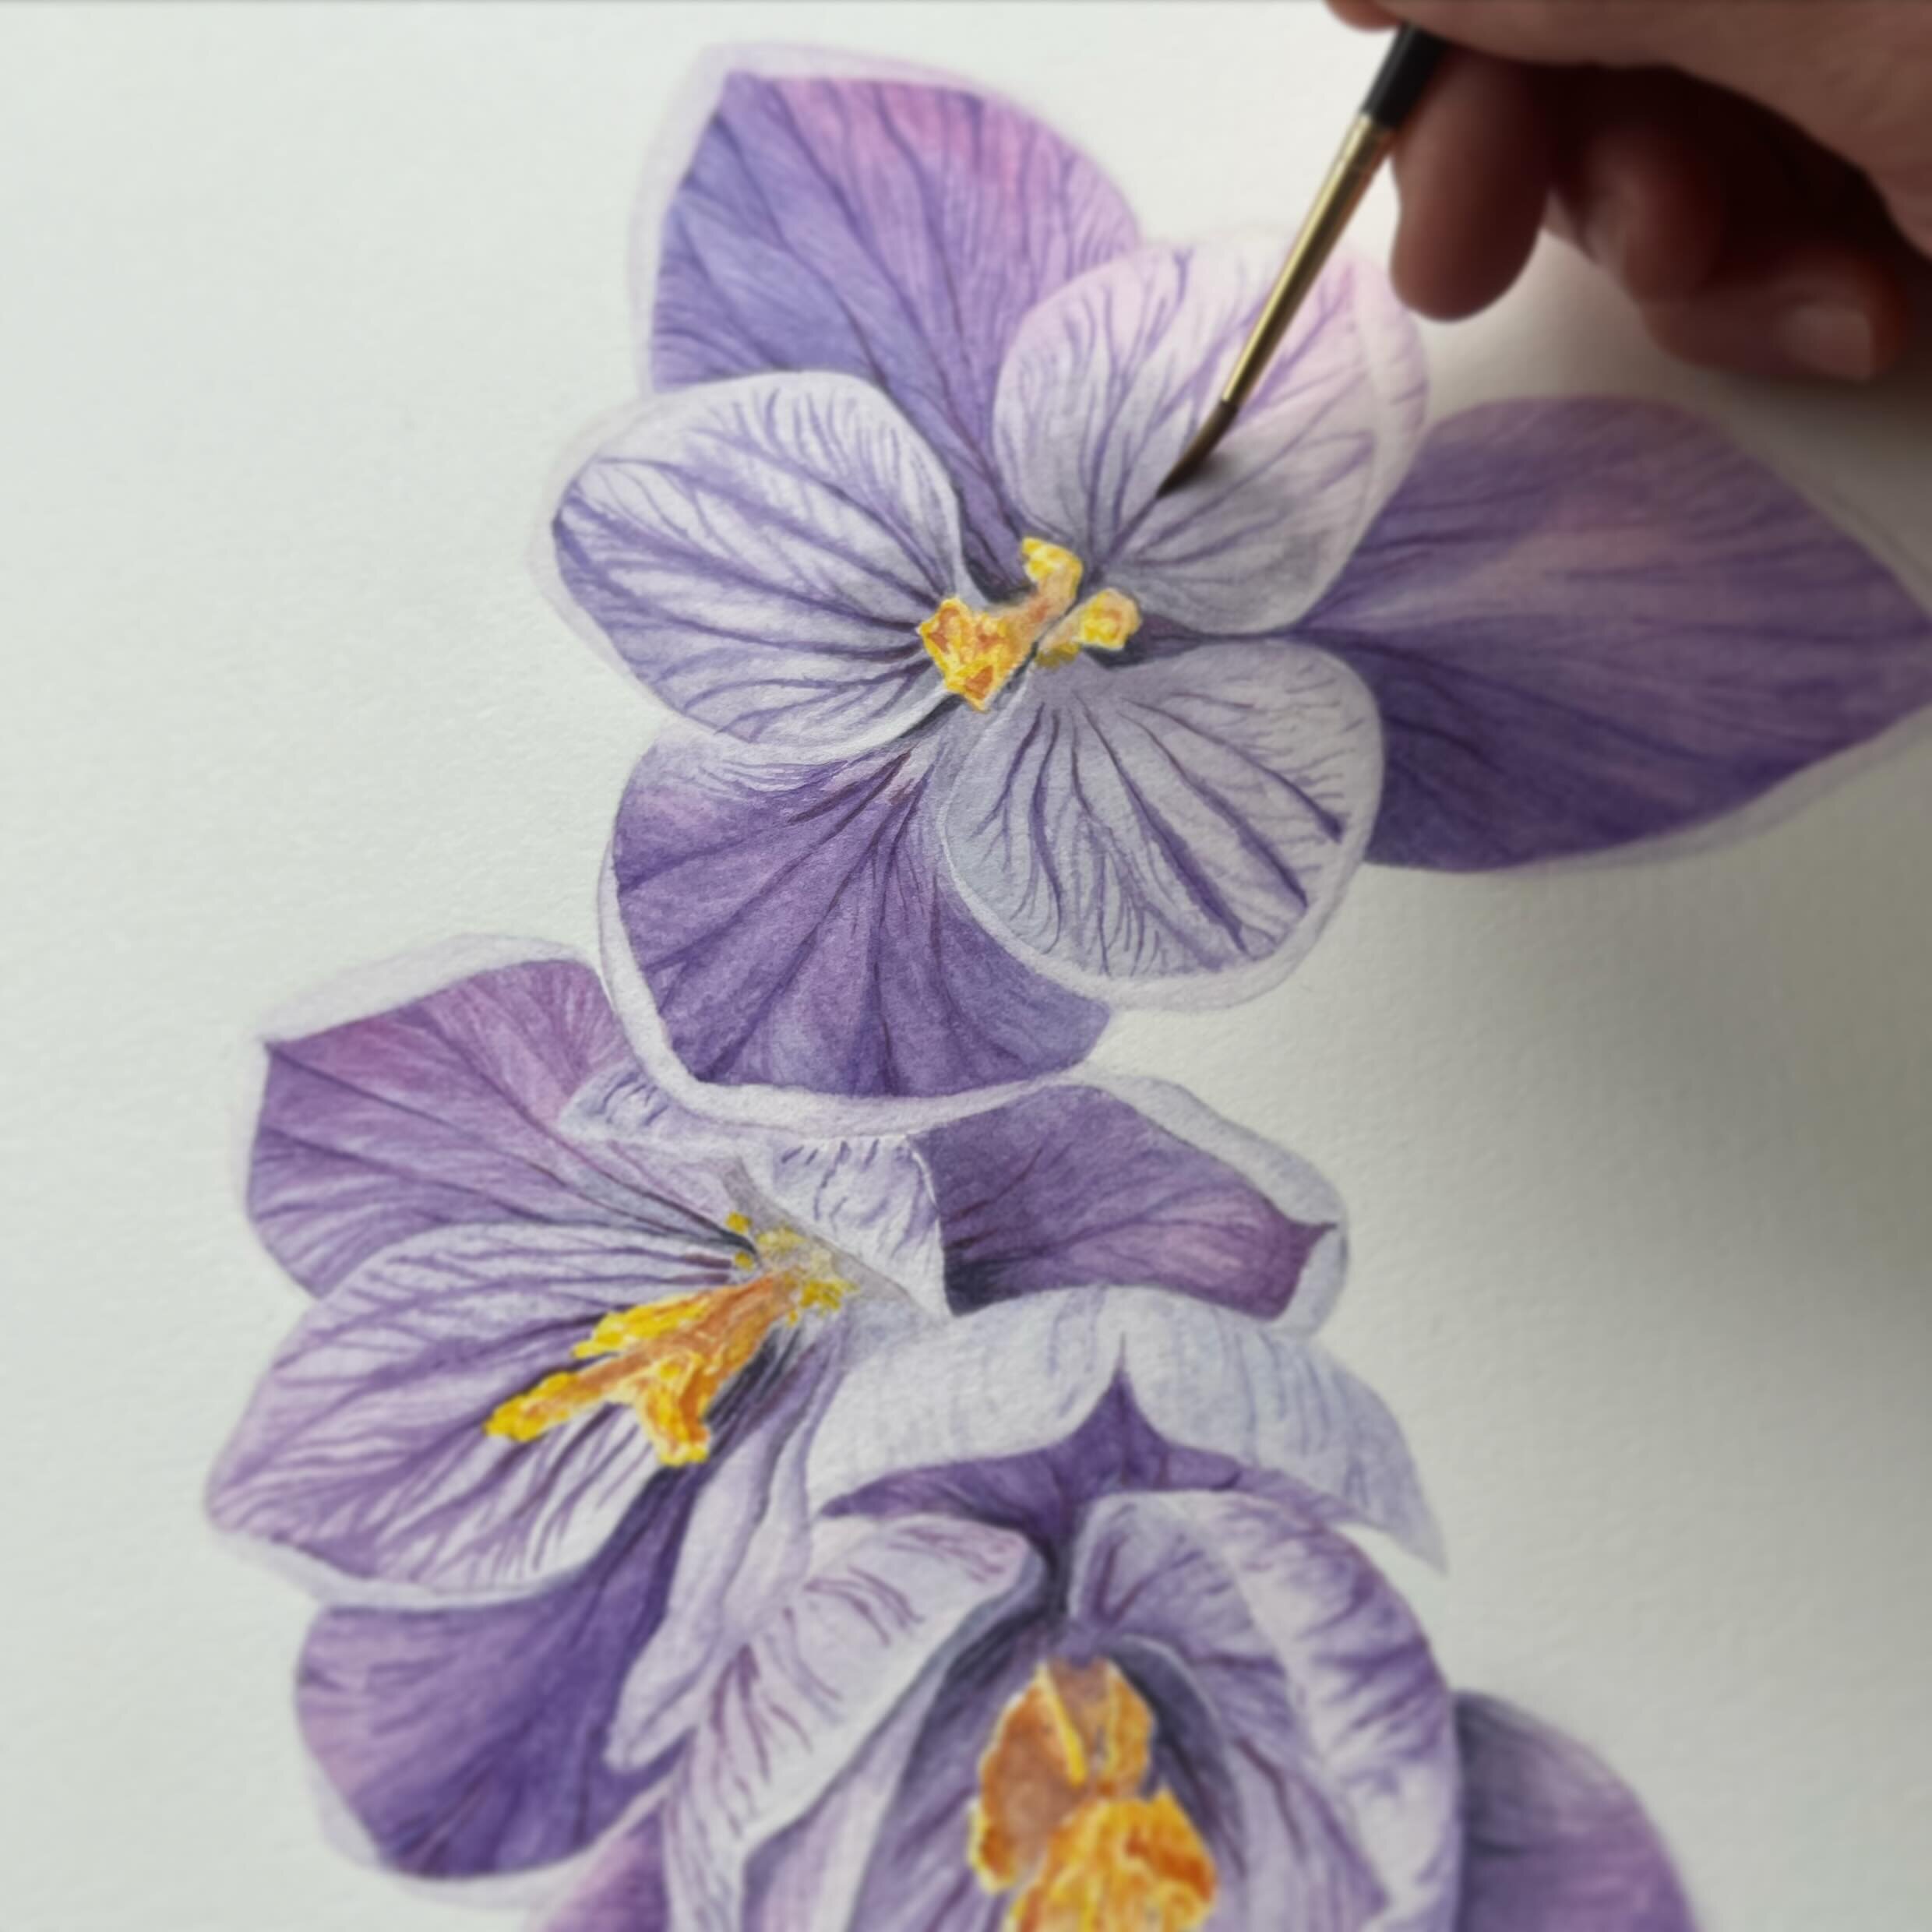 Crocus progress &mdash; working on finishing touches, my favorite part ☺️ 🎨 🖌️ 🌸
.
.
.
#watercolorpainting #watercolorprocess #botanicalart #botanicalartonline #botanicalartist #crocus #botanicalwatercolor #watercolorflowers #watercolorillustratio